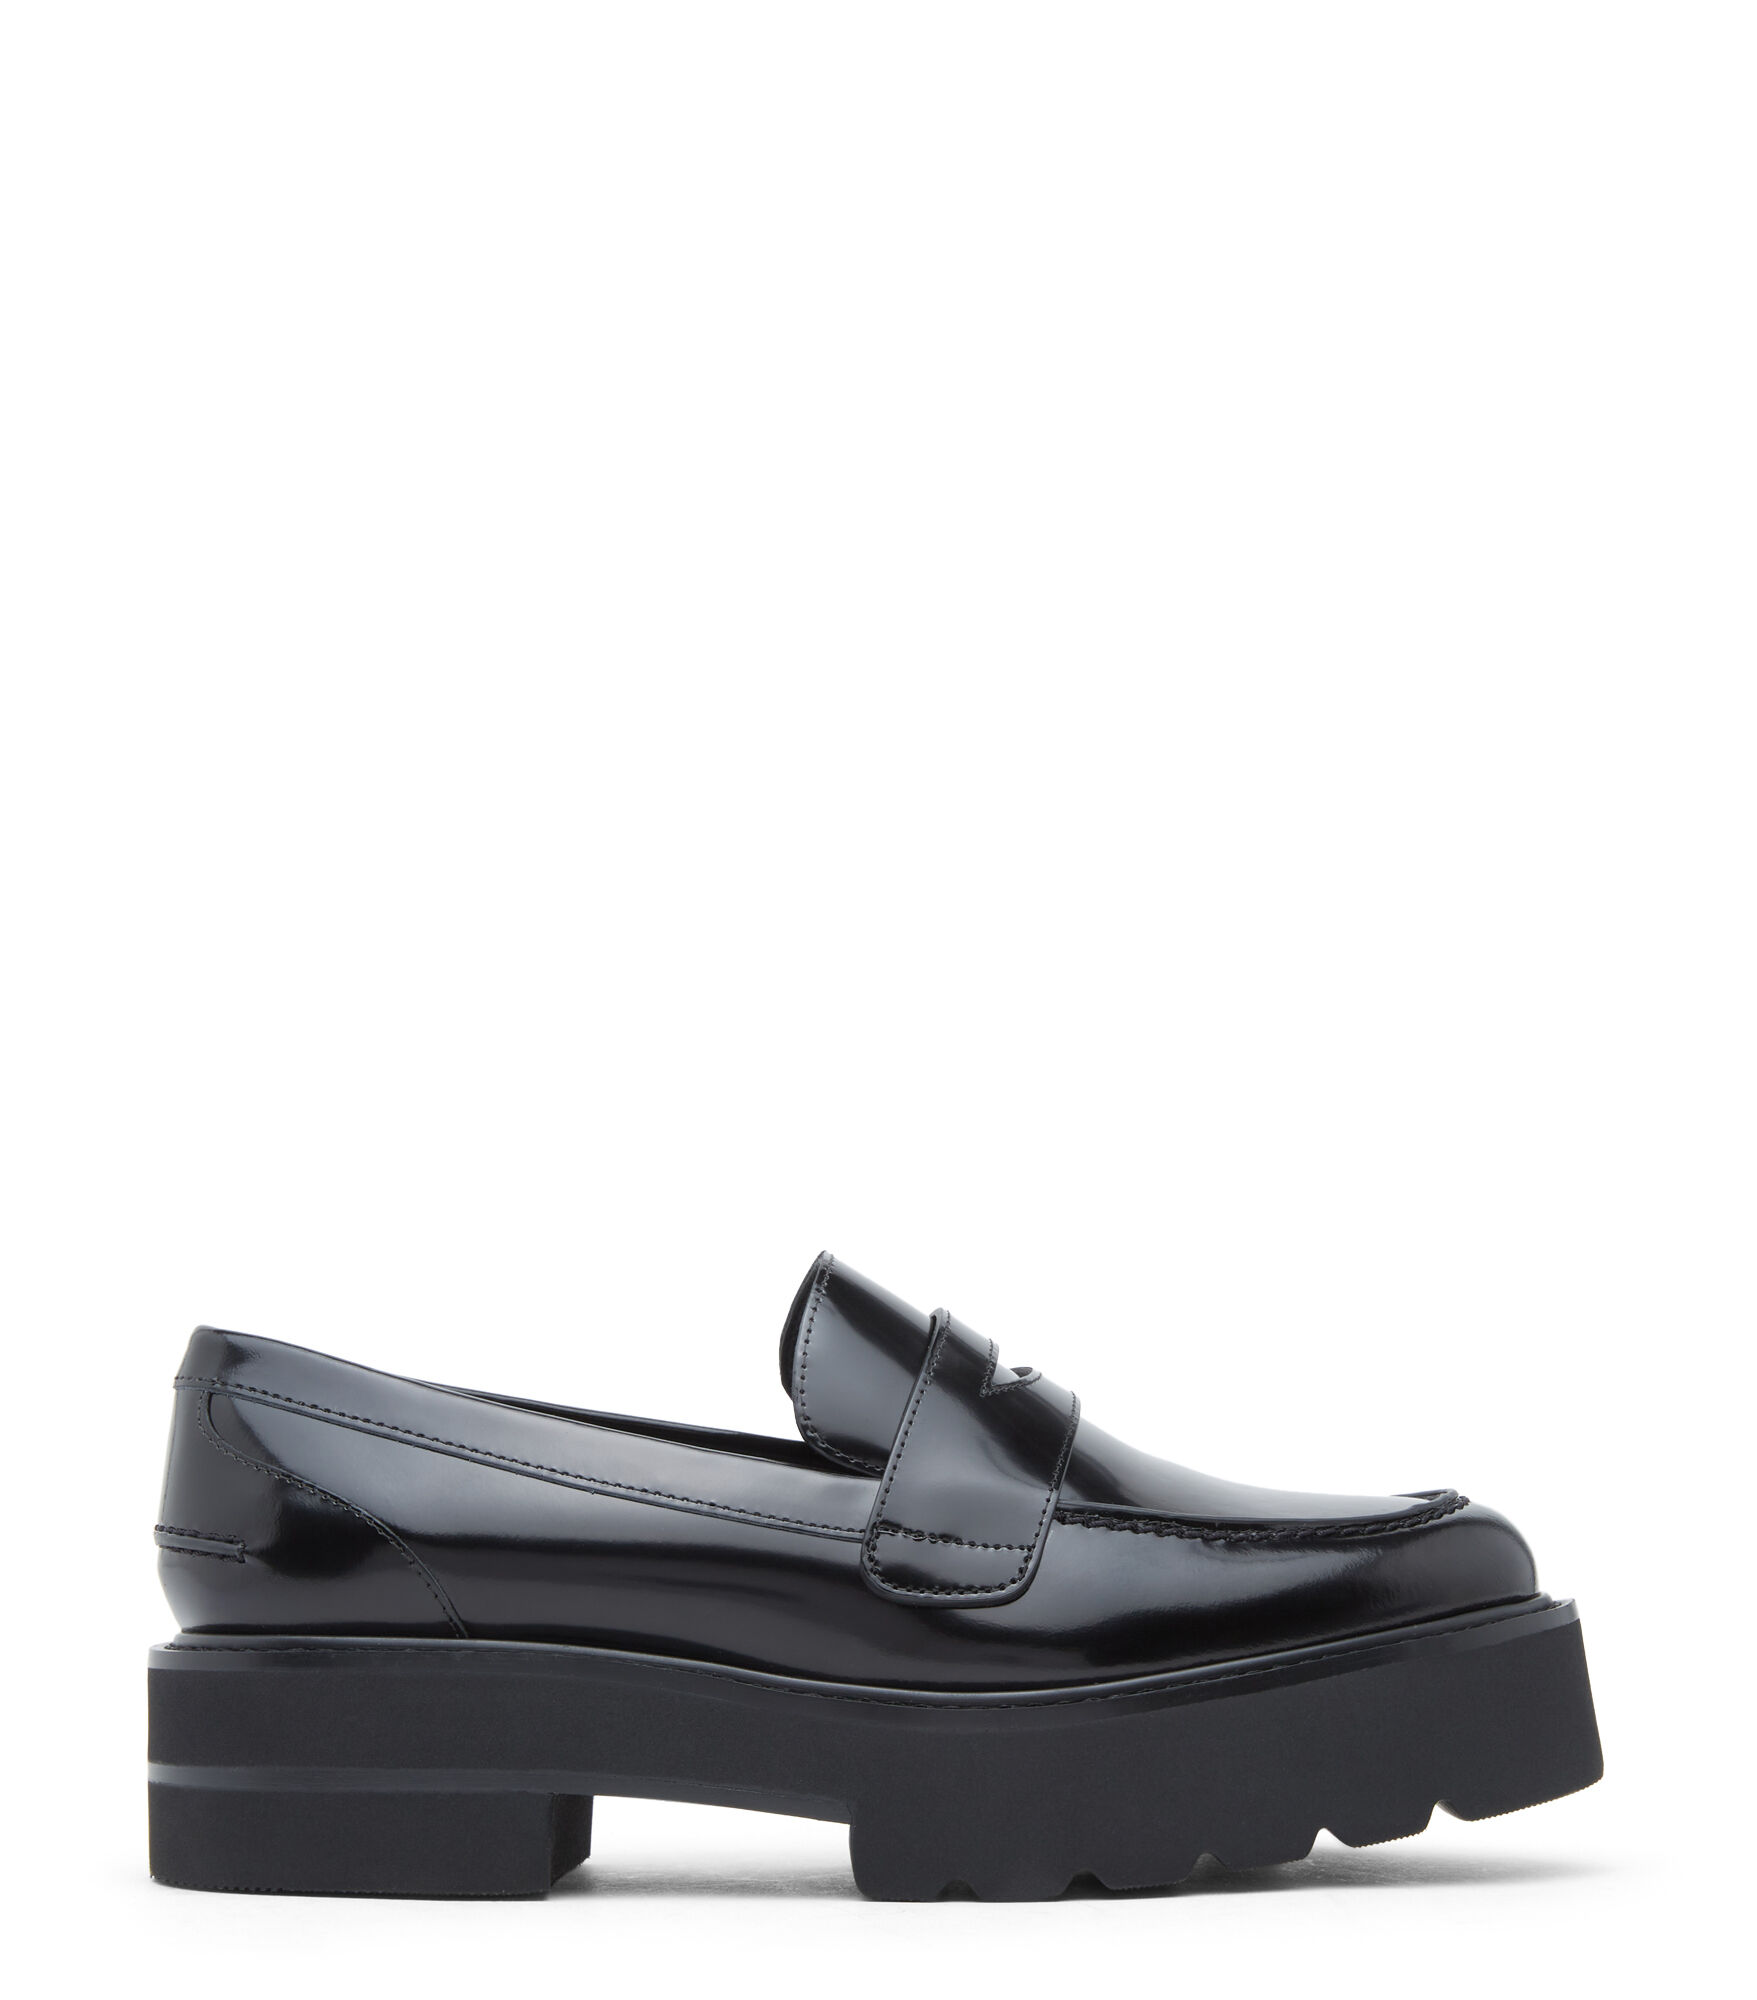 Stuart Weitzman , Ultralift Loafer, Flats And Loafers, Black, Spazzolato